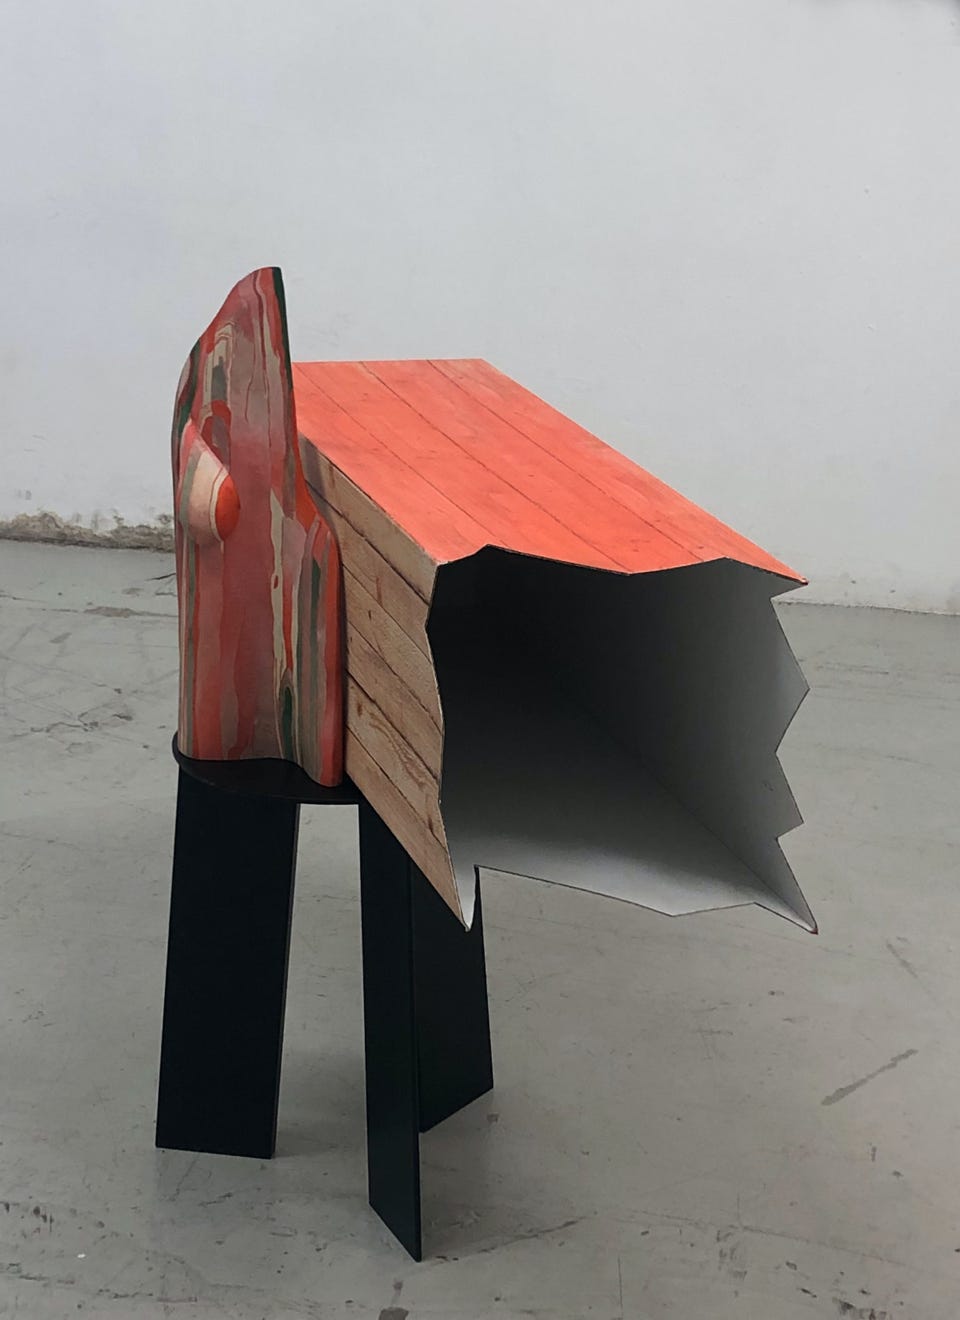 Decor, 2020, installation (hand-made oil painted wood sculpture, ready-made table by HAY, cardboard by Solits, woodstack design by Marcel Hellemons)